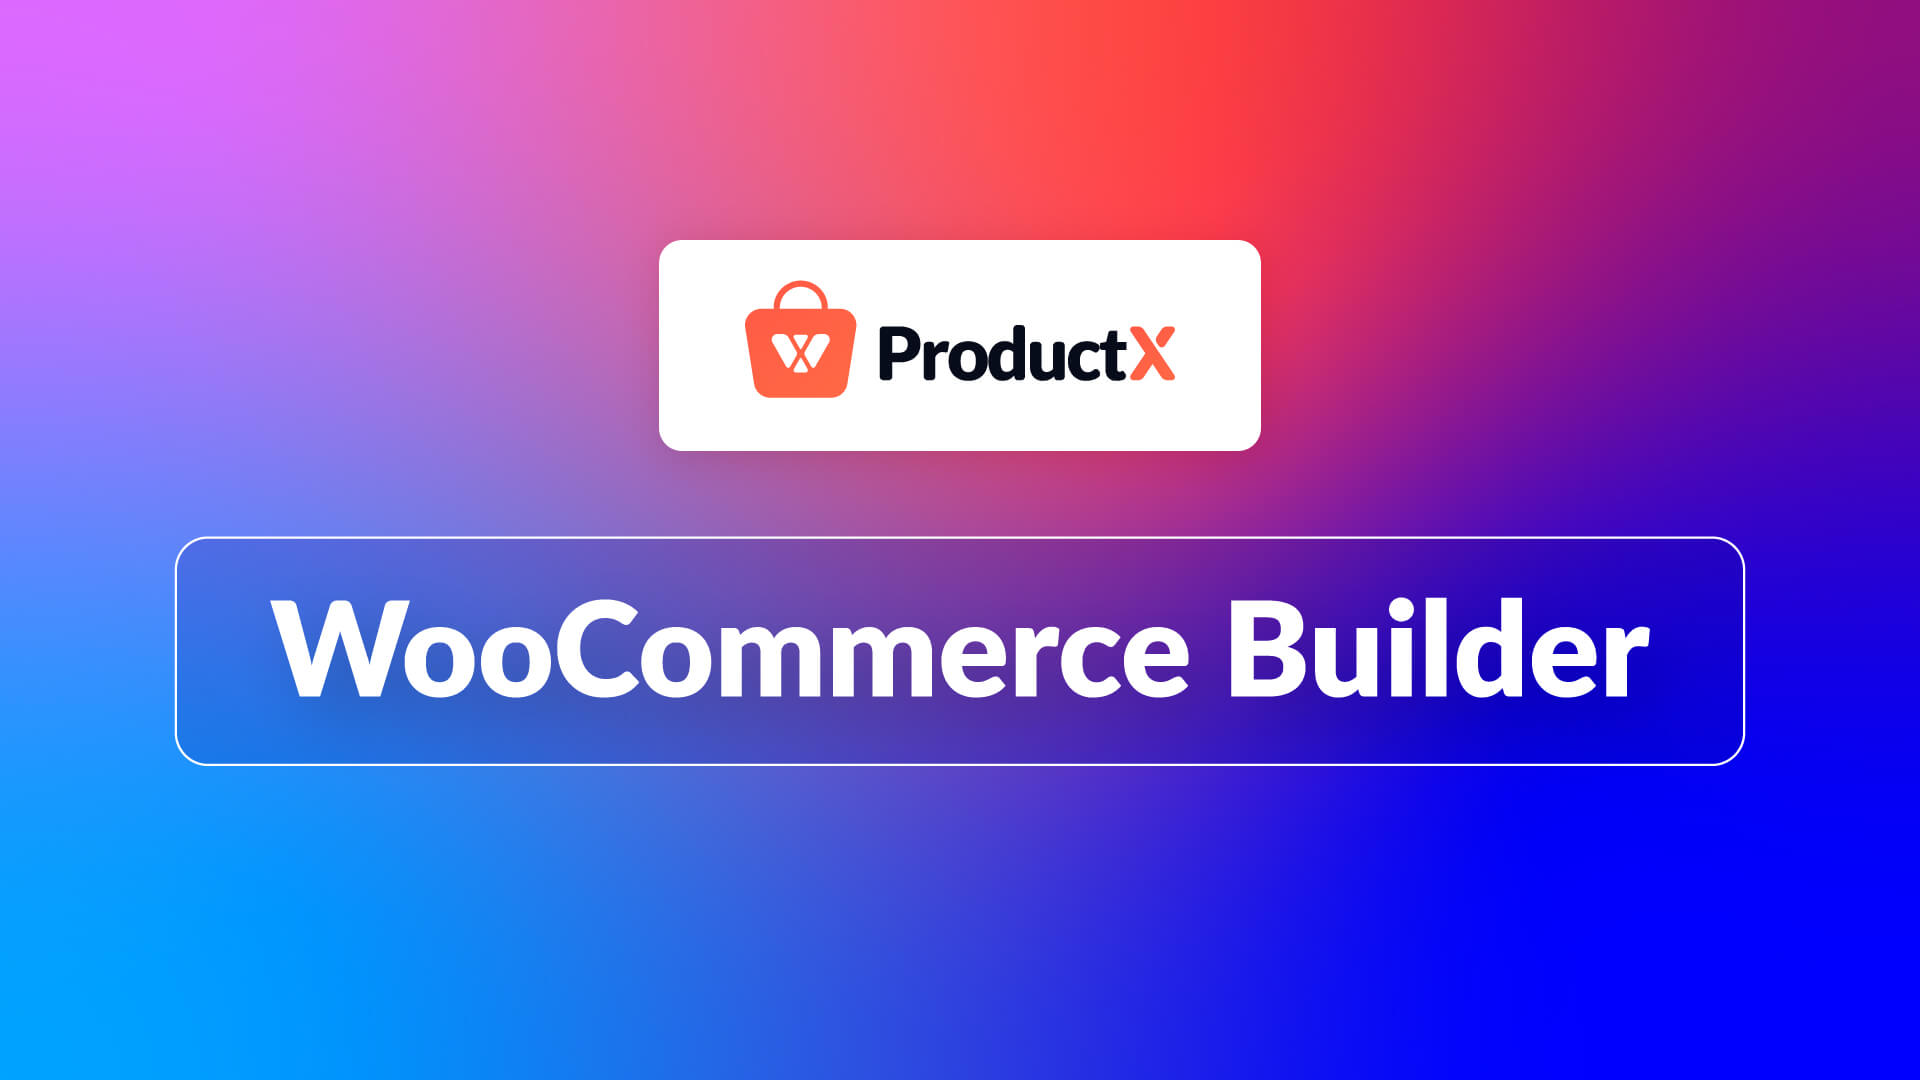 Introducing ProductX WooCommerce Builder